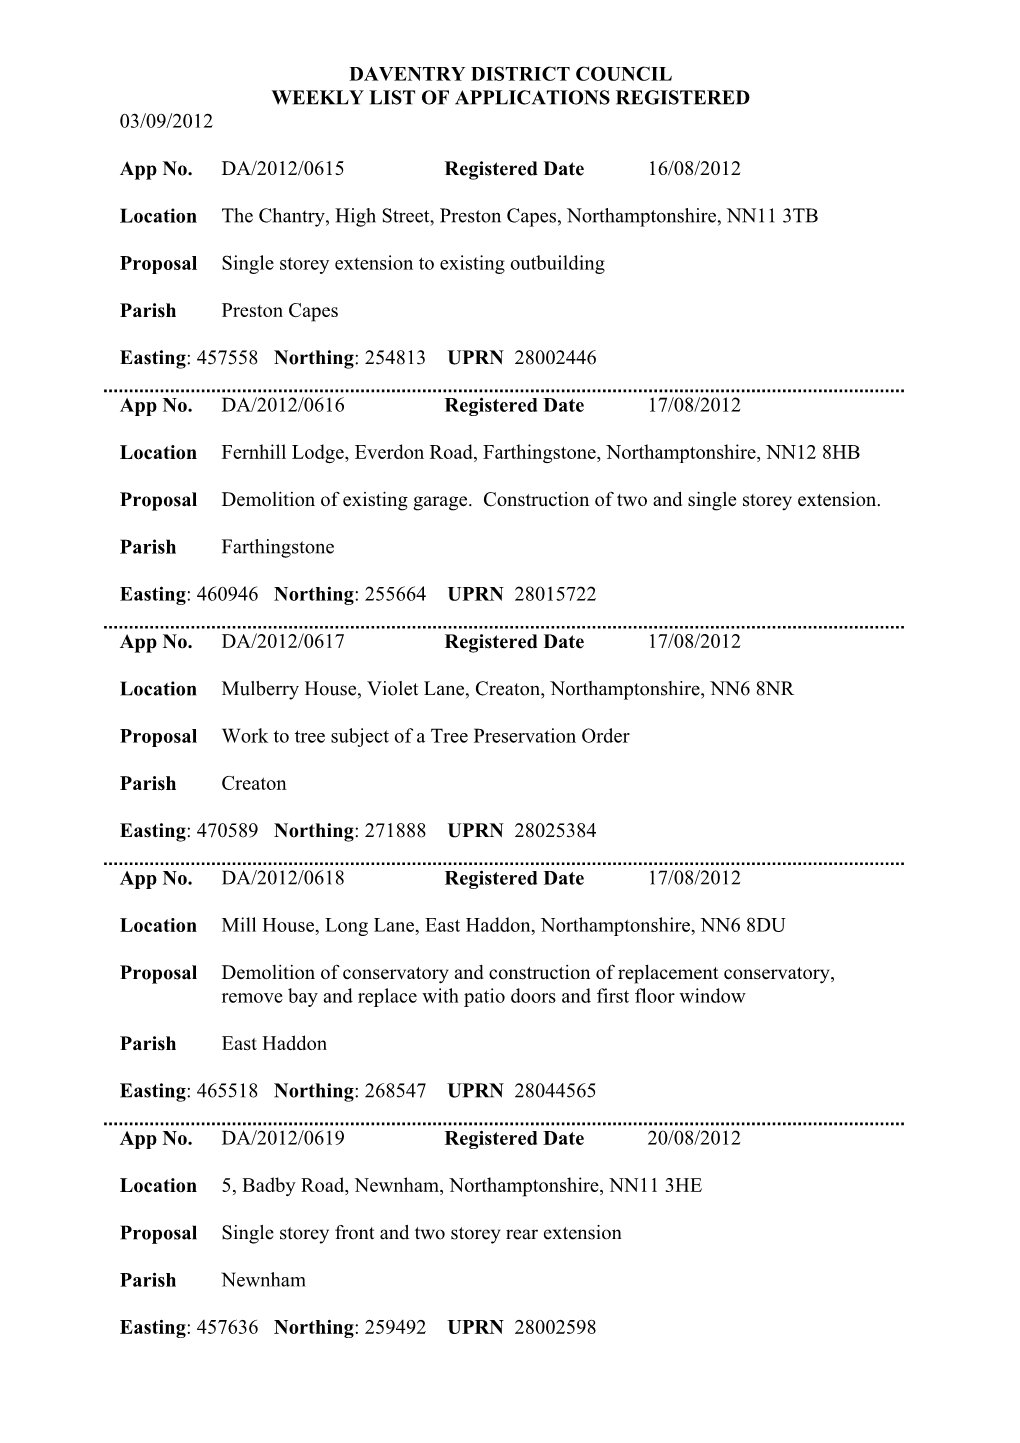 Daventry District Council Weekly List of Applications Registered 03/09/2012